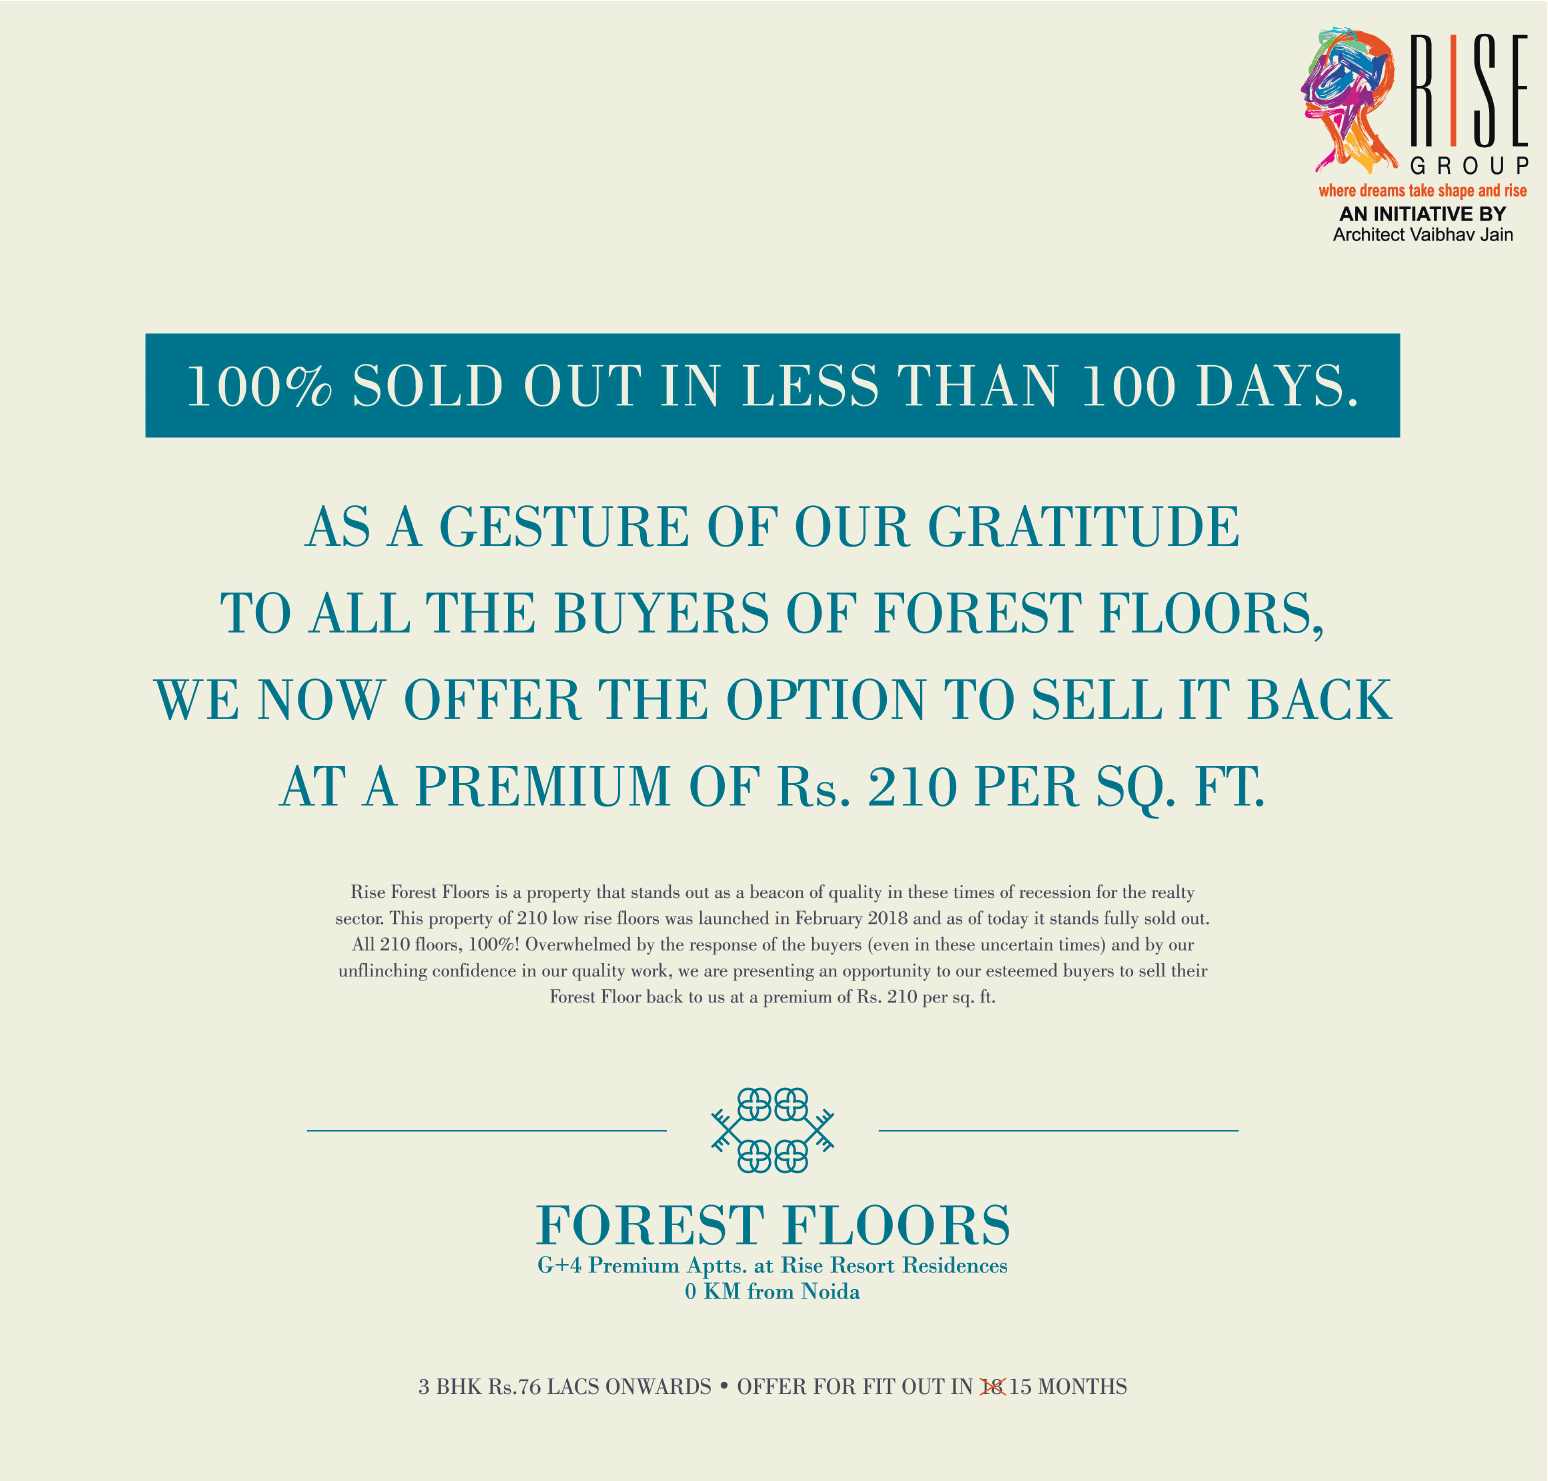 Book home at a premium of Rs. 210 per sq.ft. at Rise Forest Floors, Greater Noida Update